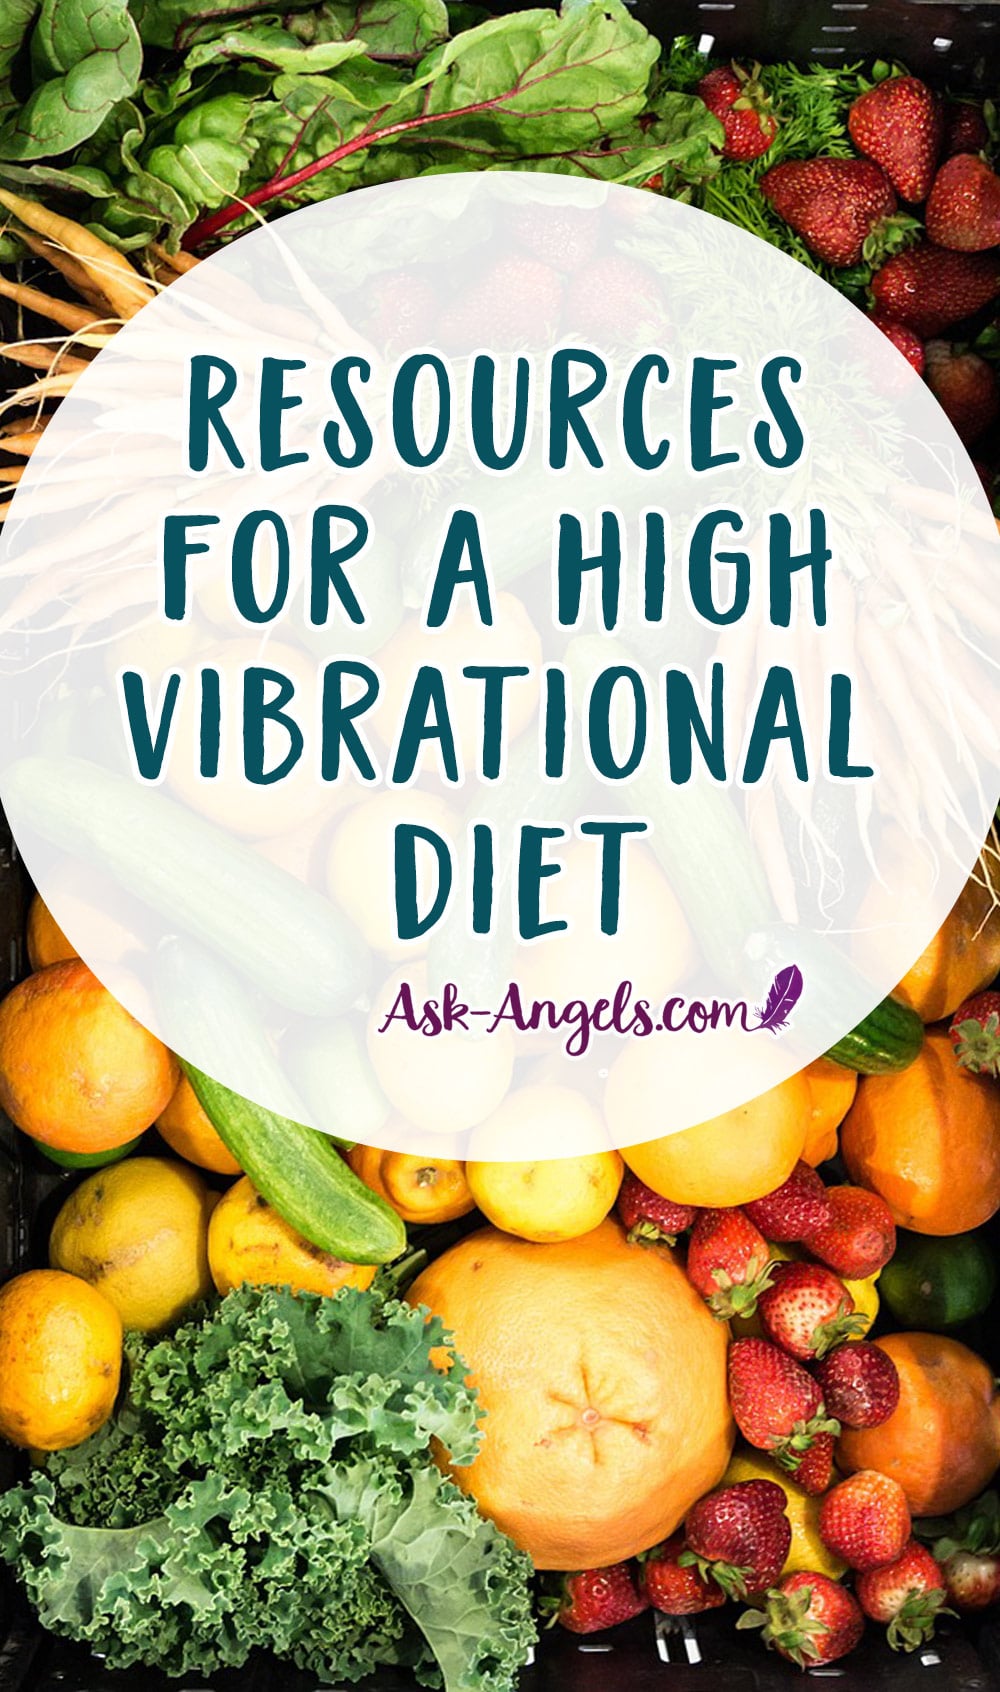 Resources for a High Vibrational Diet